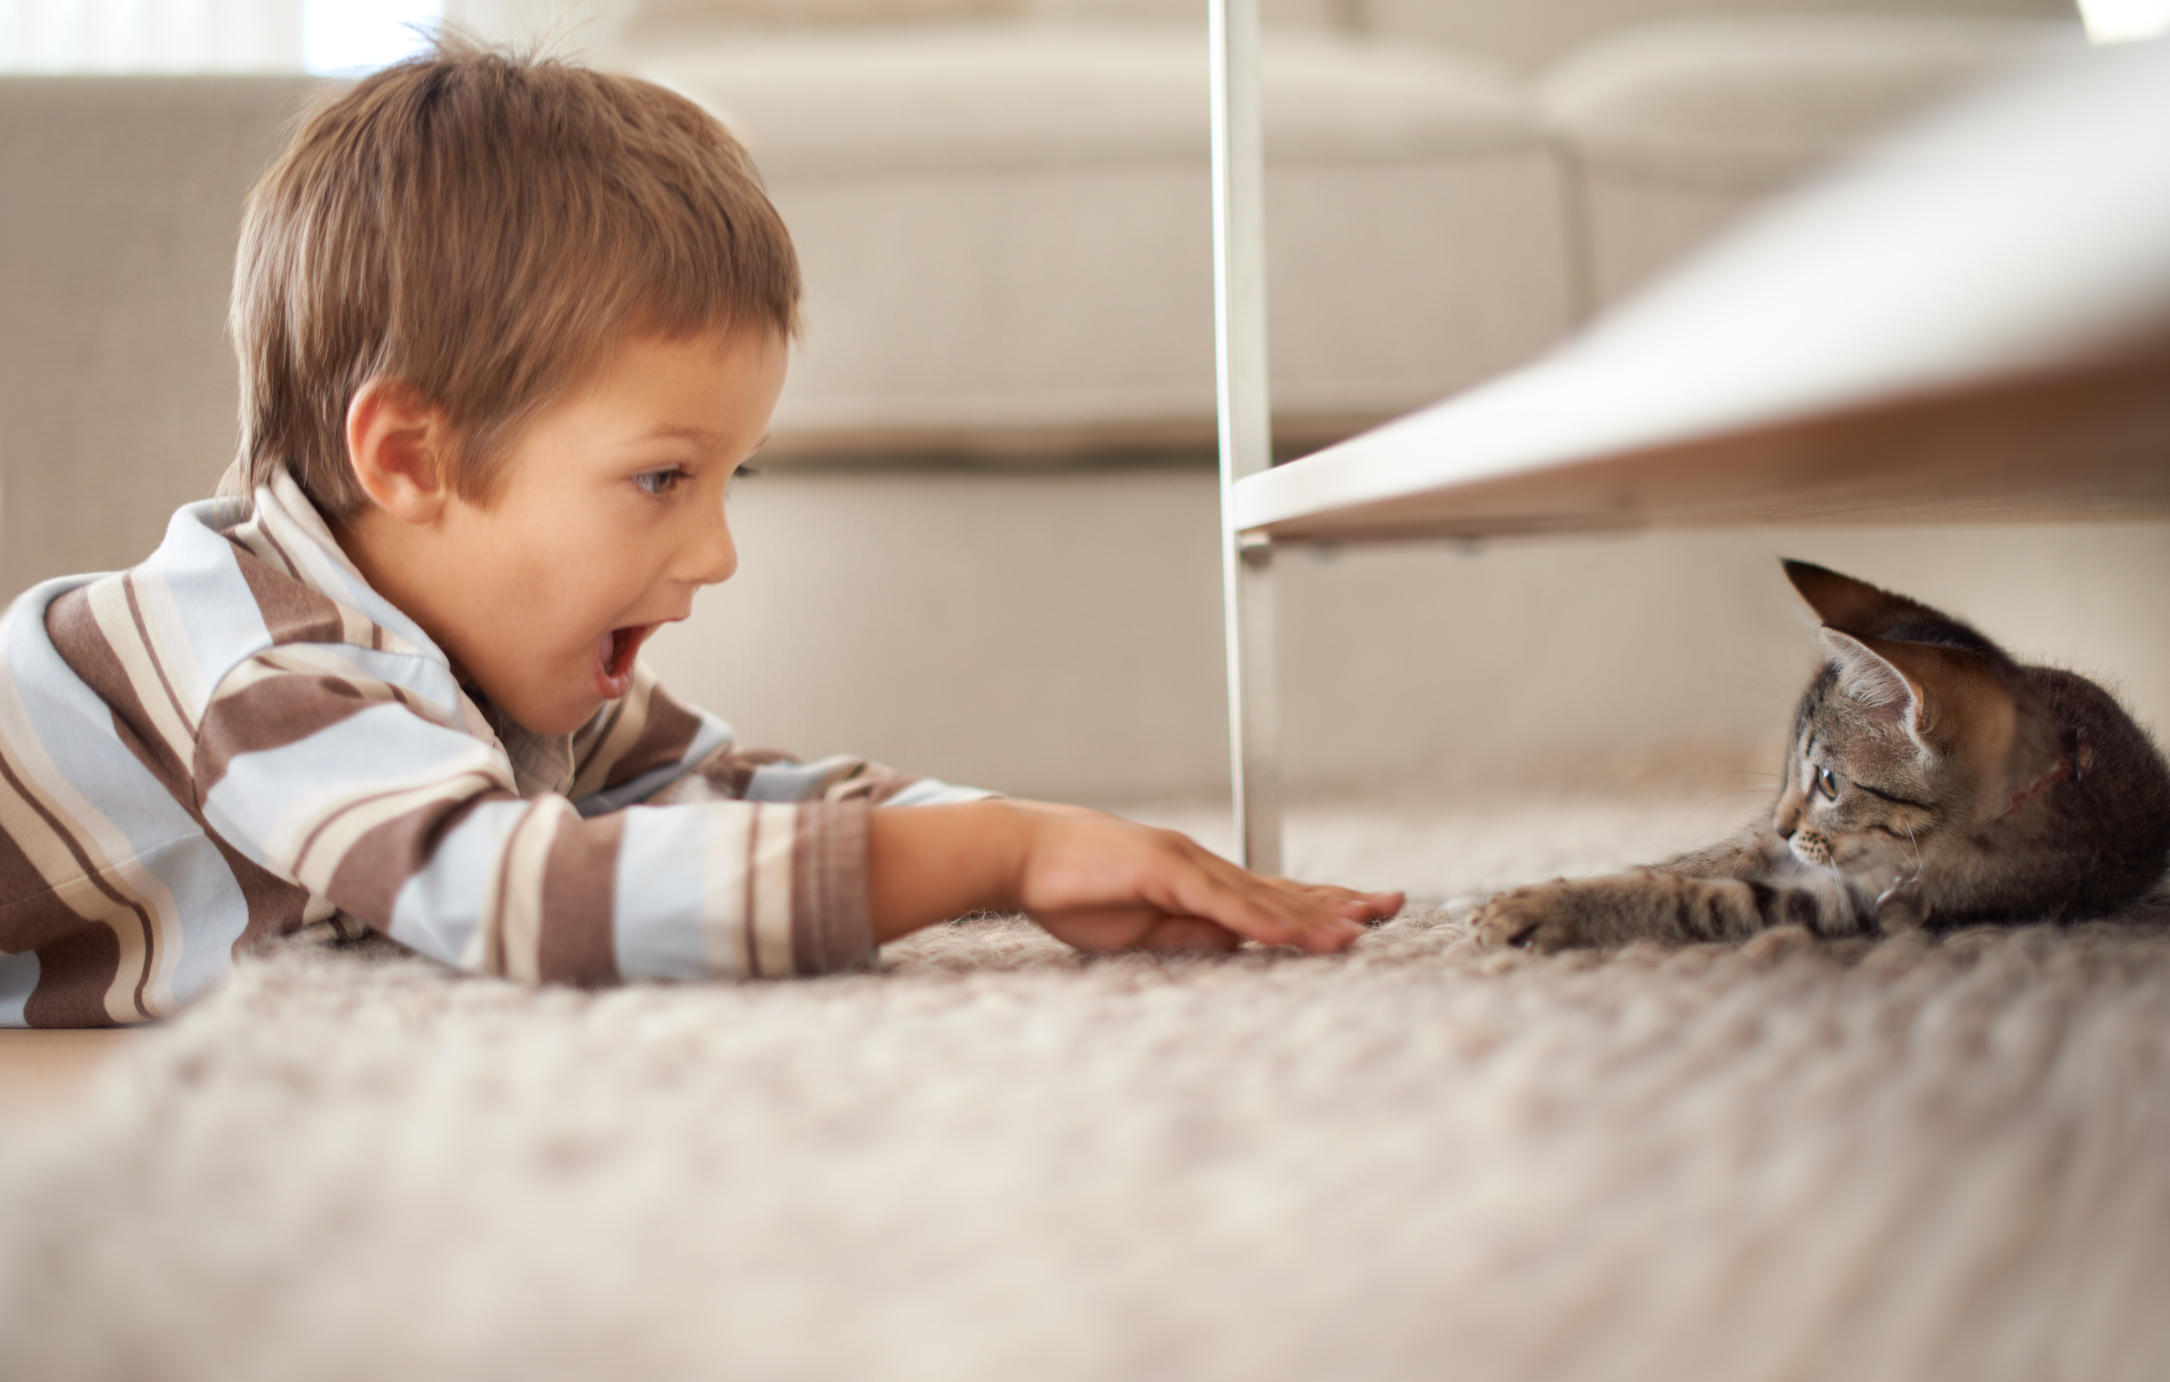 Young boy plays with a kitten under the table